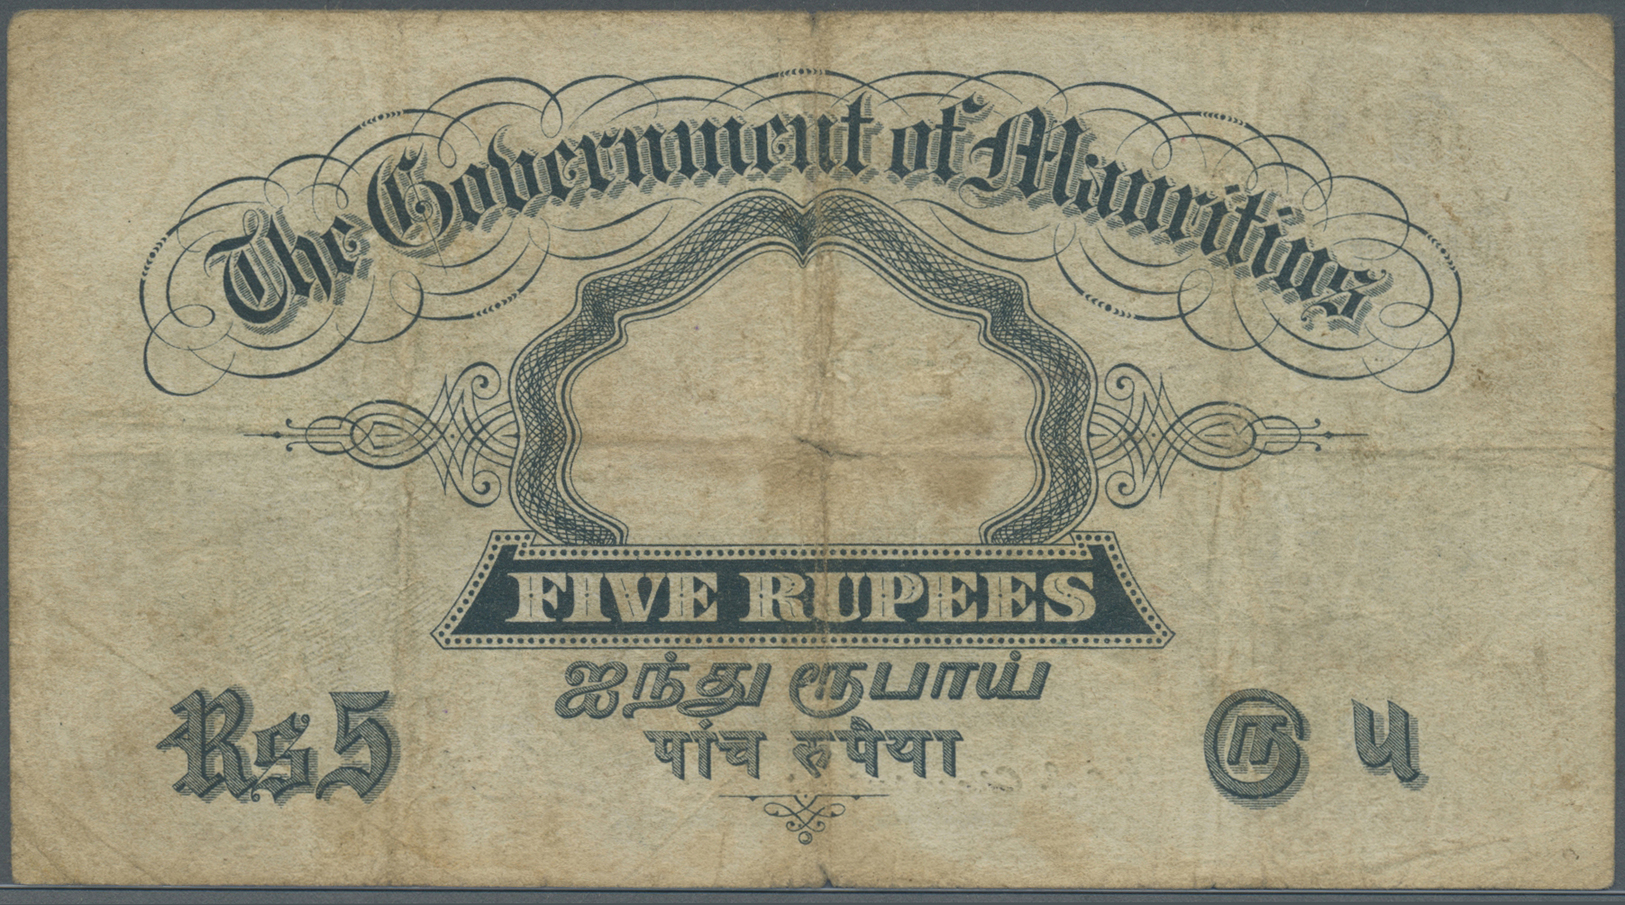 01692 Mauritius: 5 Rupees 1937 P. 22, Portrait KG VI, Used With Stronger Center And Horizontal Fold, Creases And Stain I - Mauritius